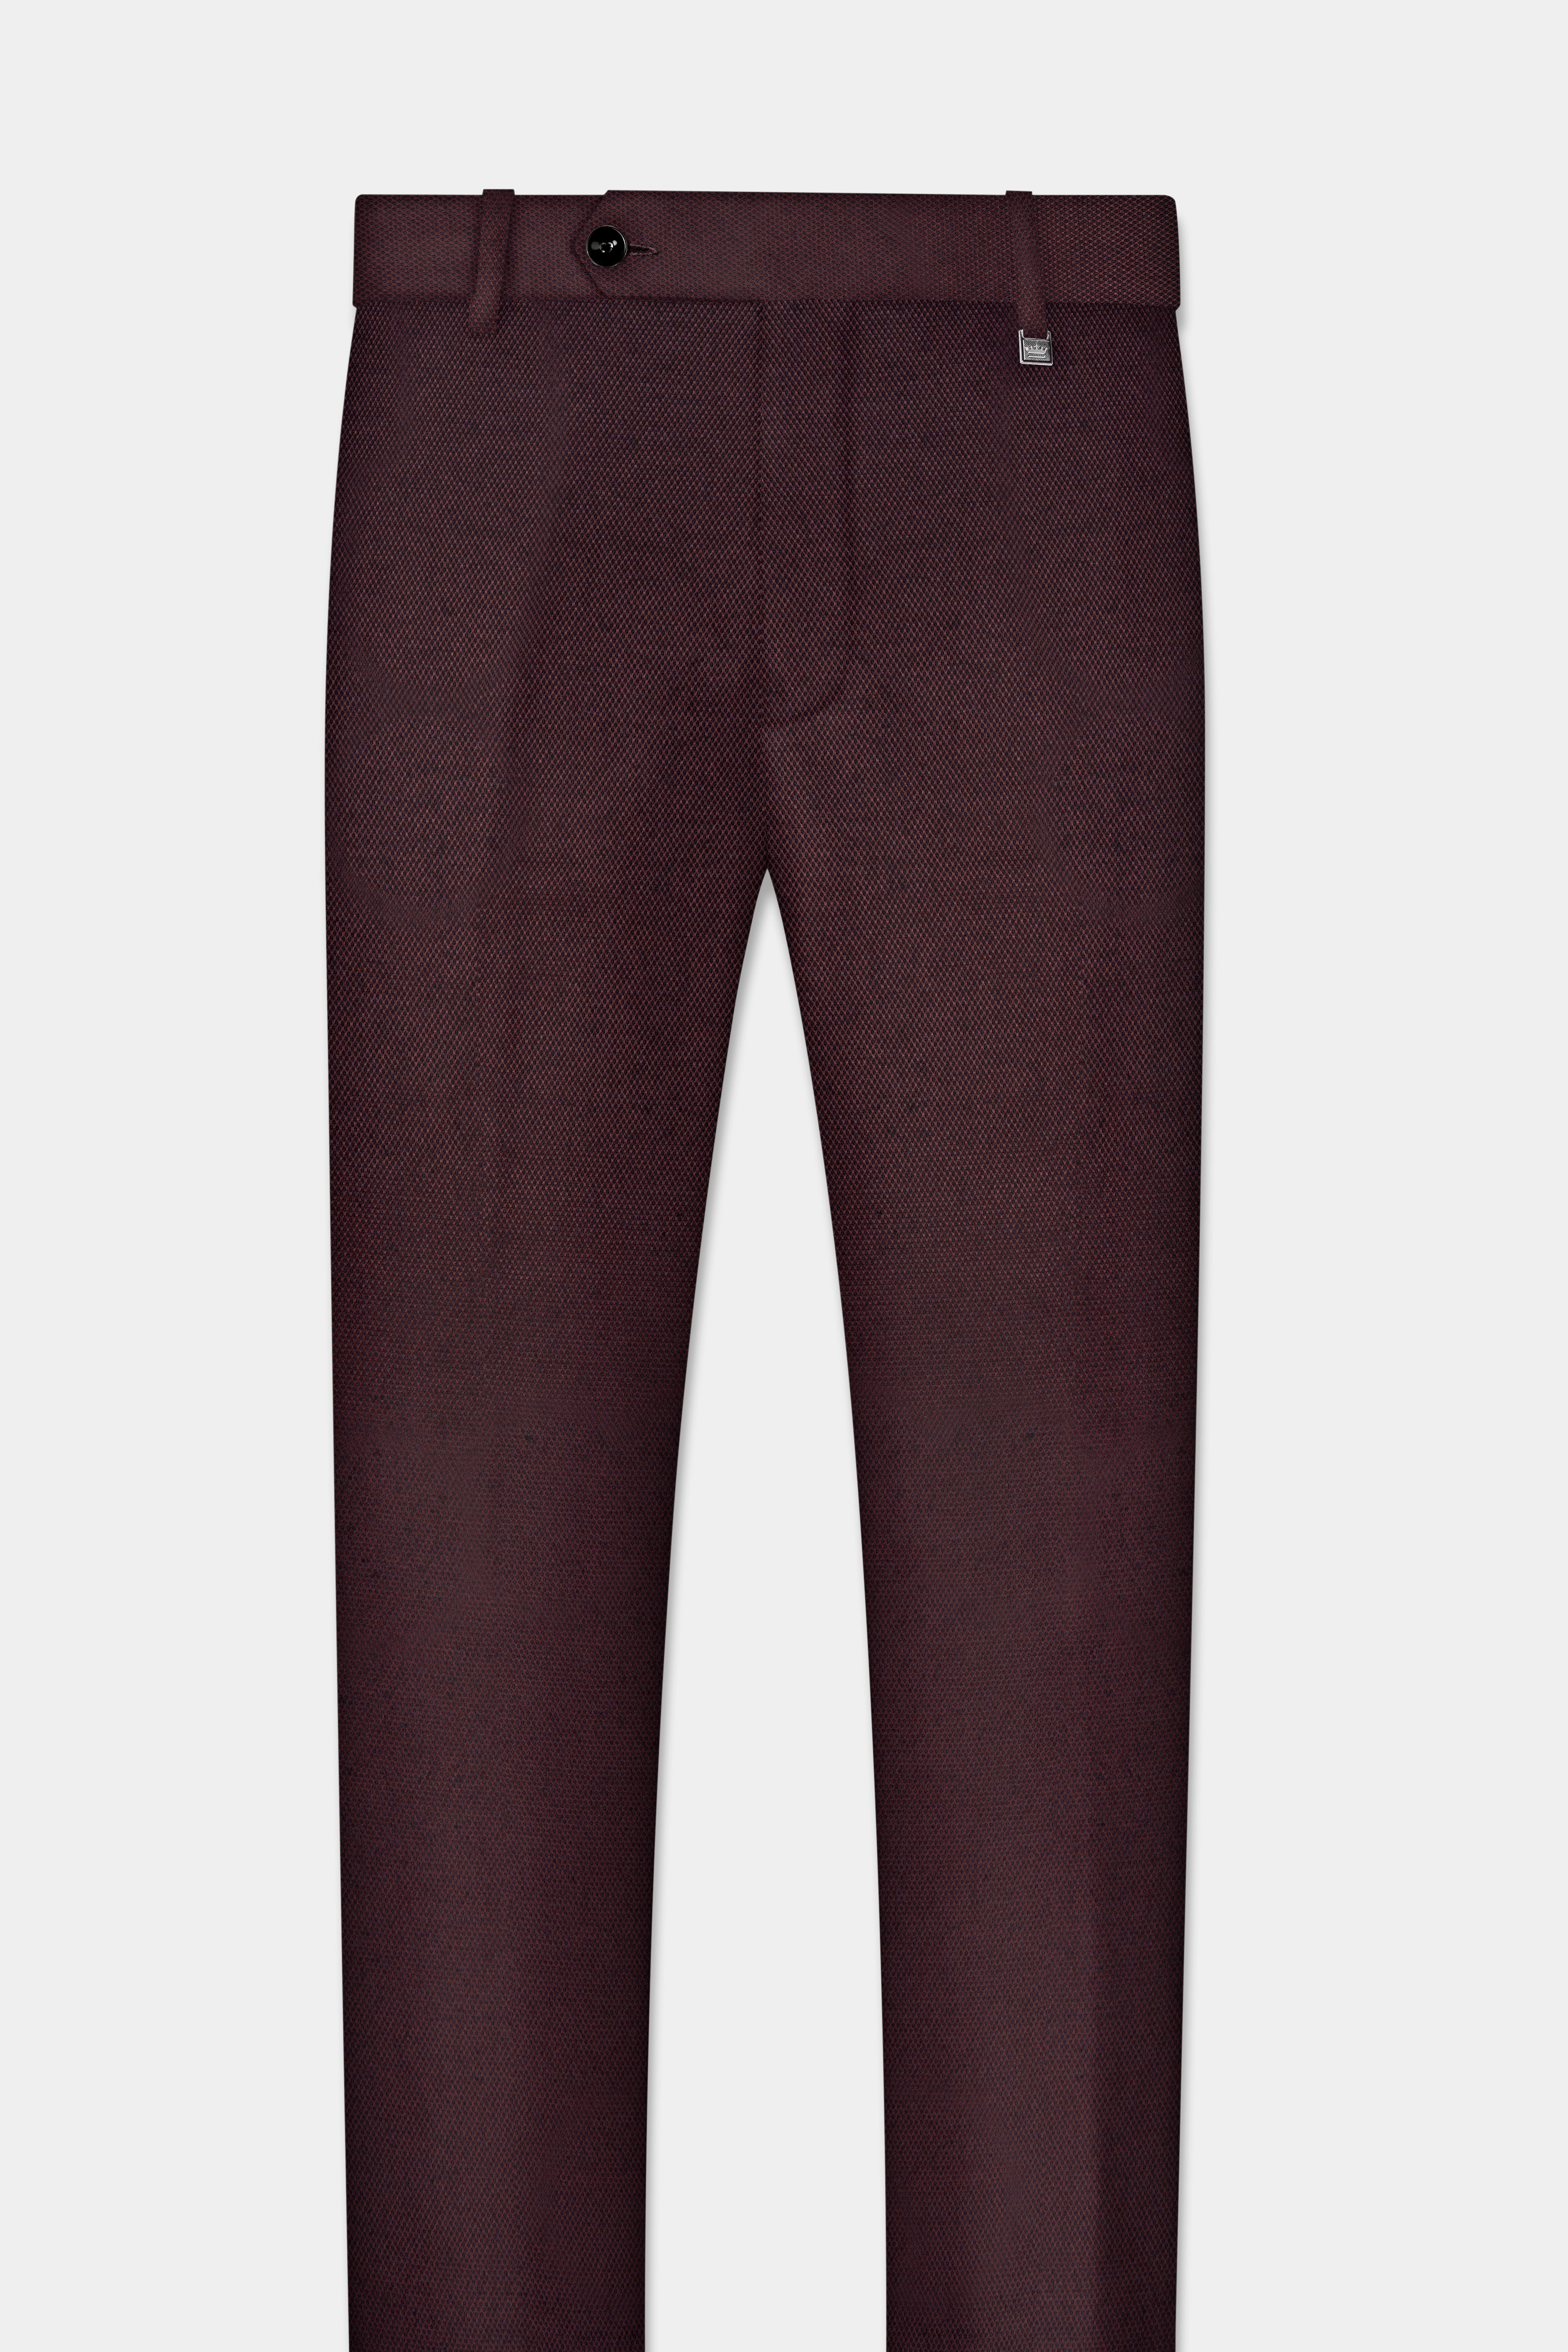 Eclipse Maroon Textured Wool Rich Double Breasted Suit